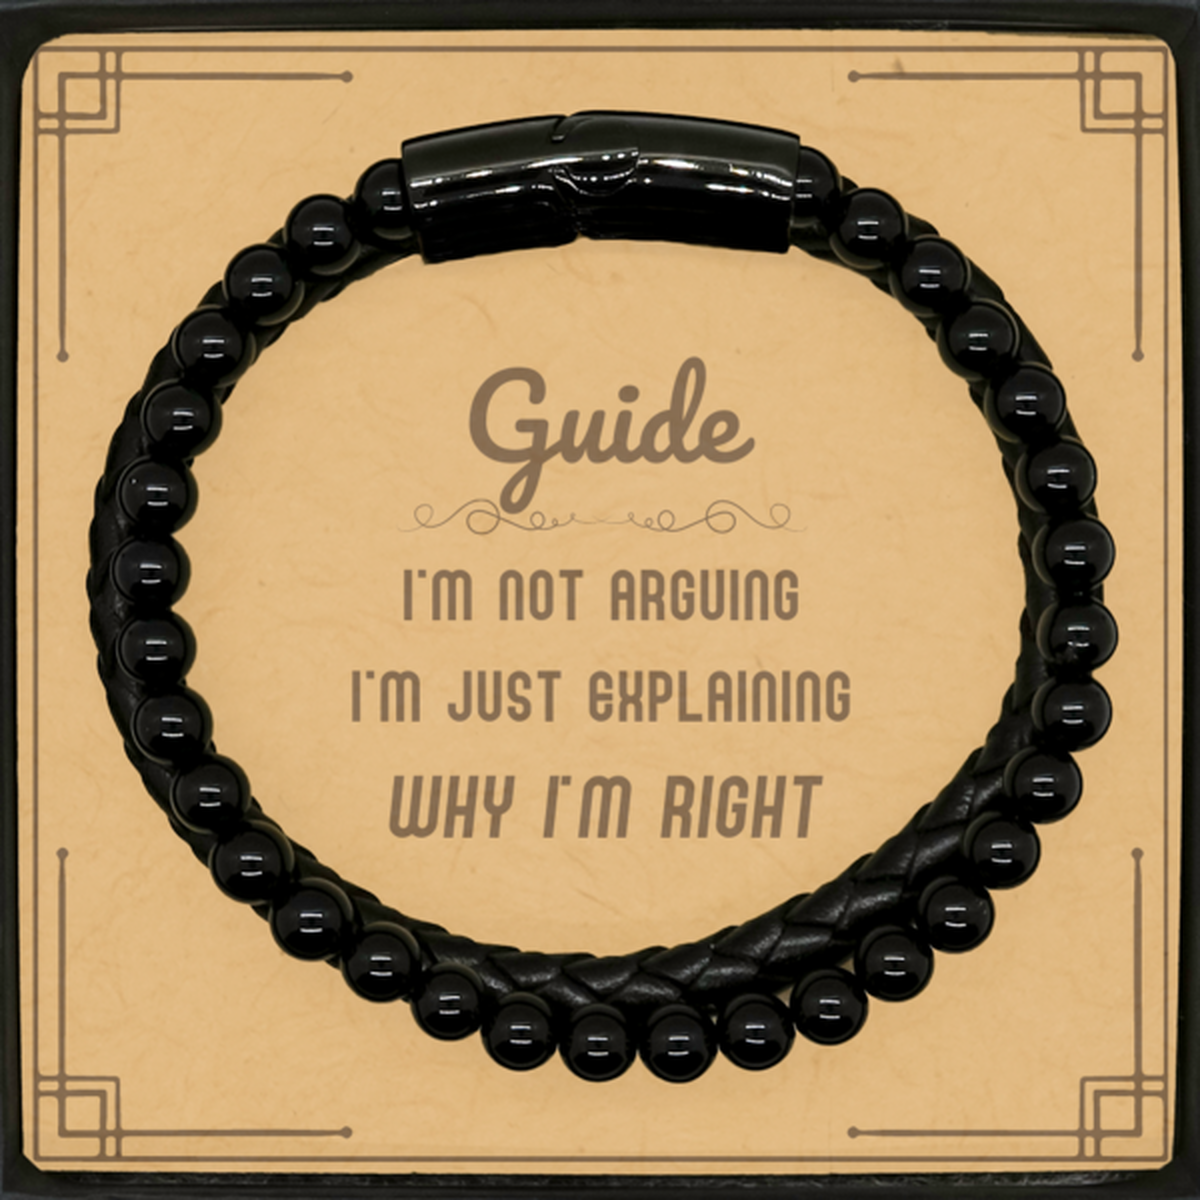 Guide I'm not Arguing. I'm Just Explaining Why I'm RIGHT Stone Leather Bracelets, Funny Saying Quote Guide Gifts For Guide Message Card Graduation Birthday Christmas Gifts for Men Women Coworker